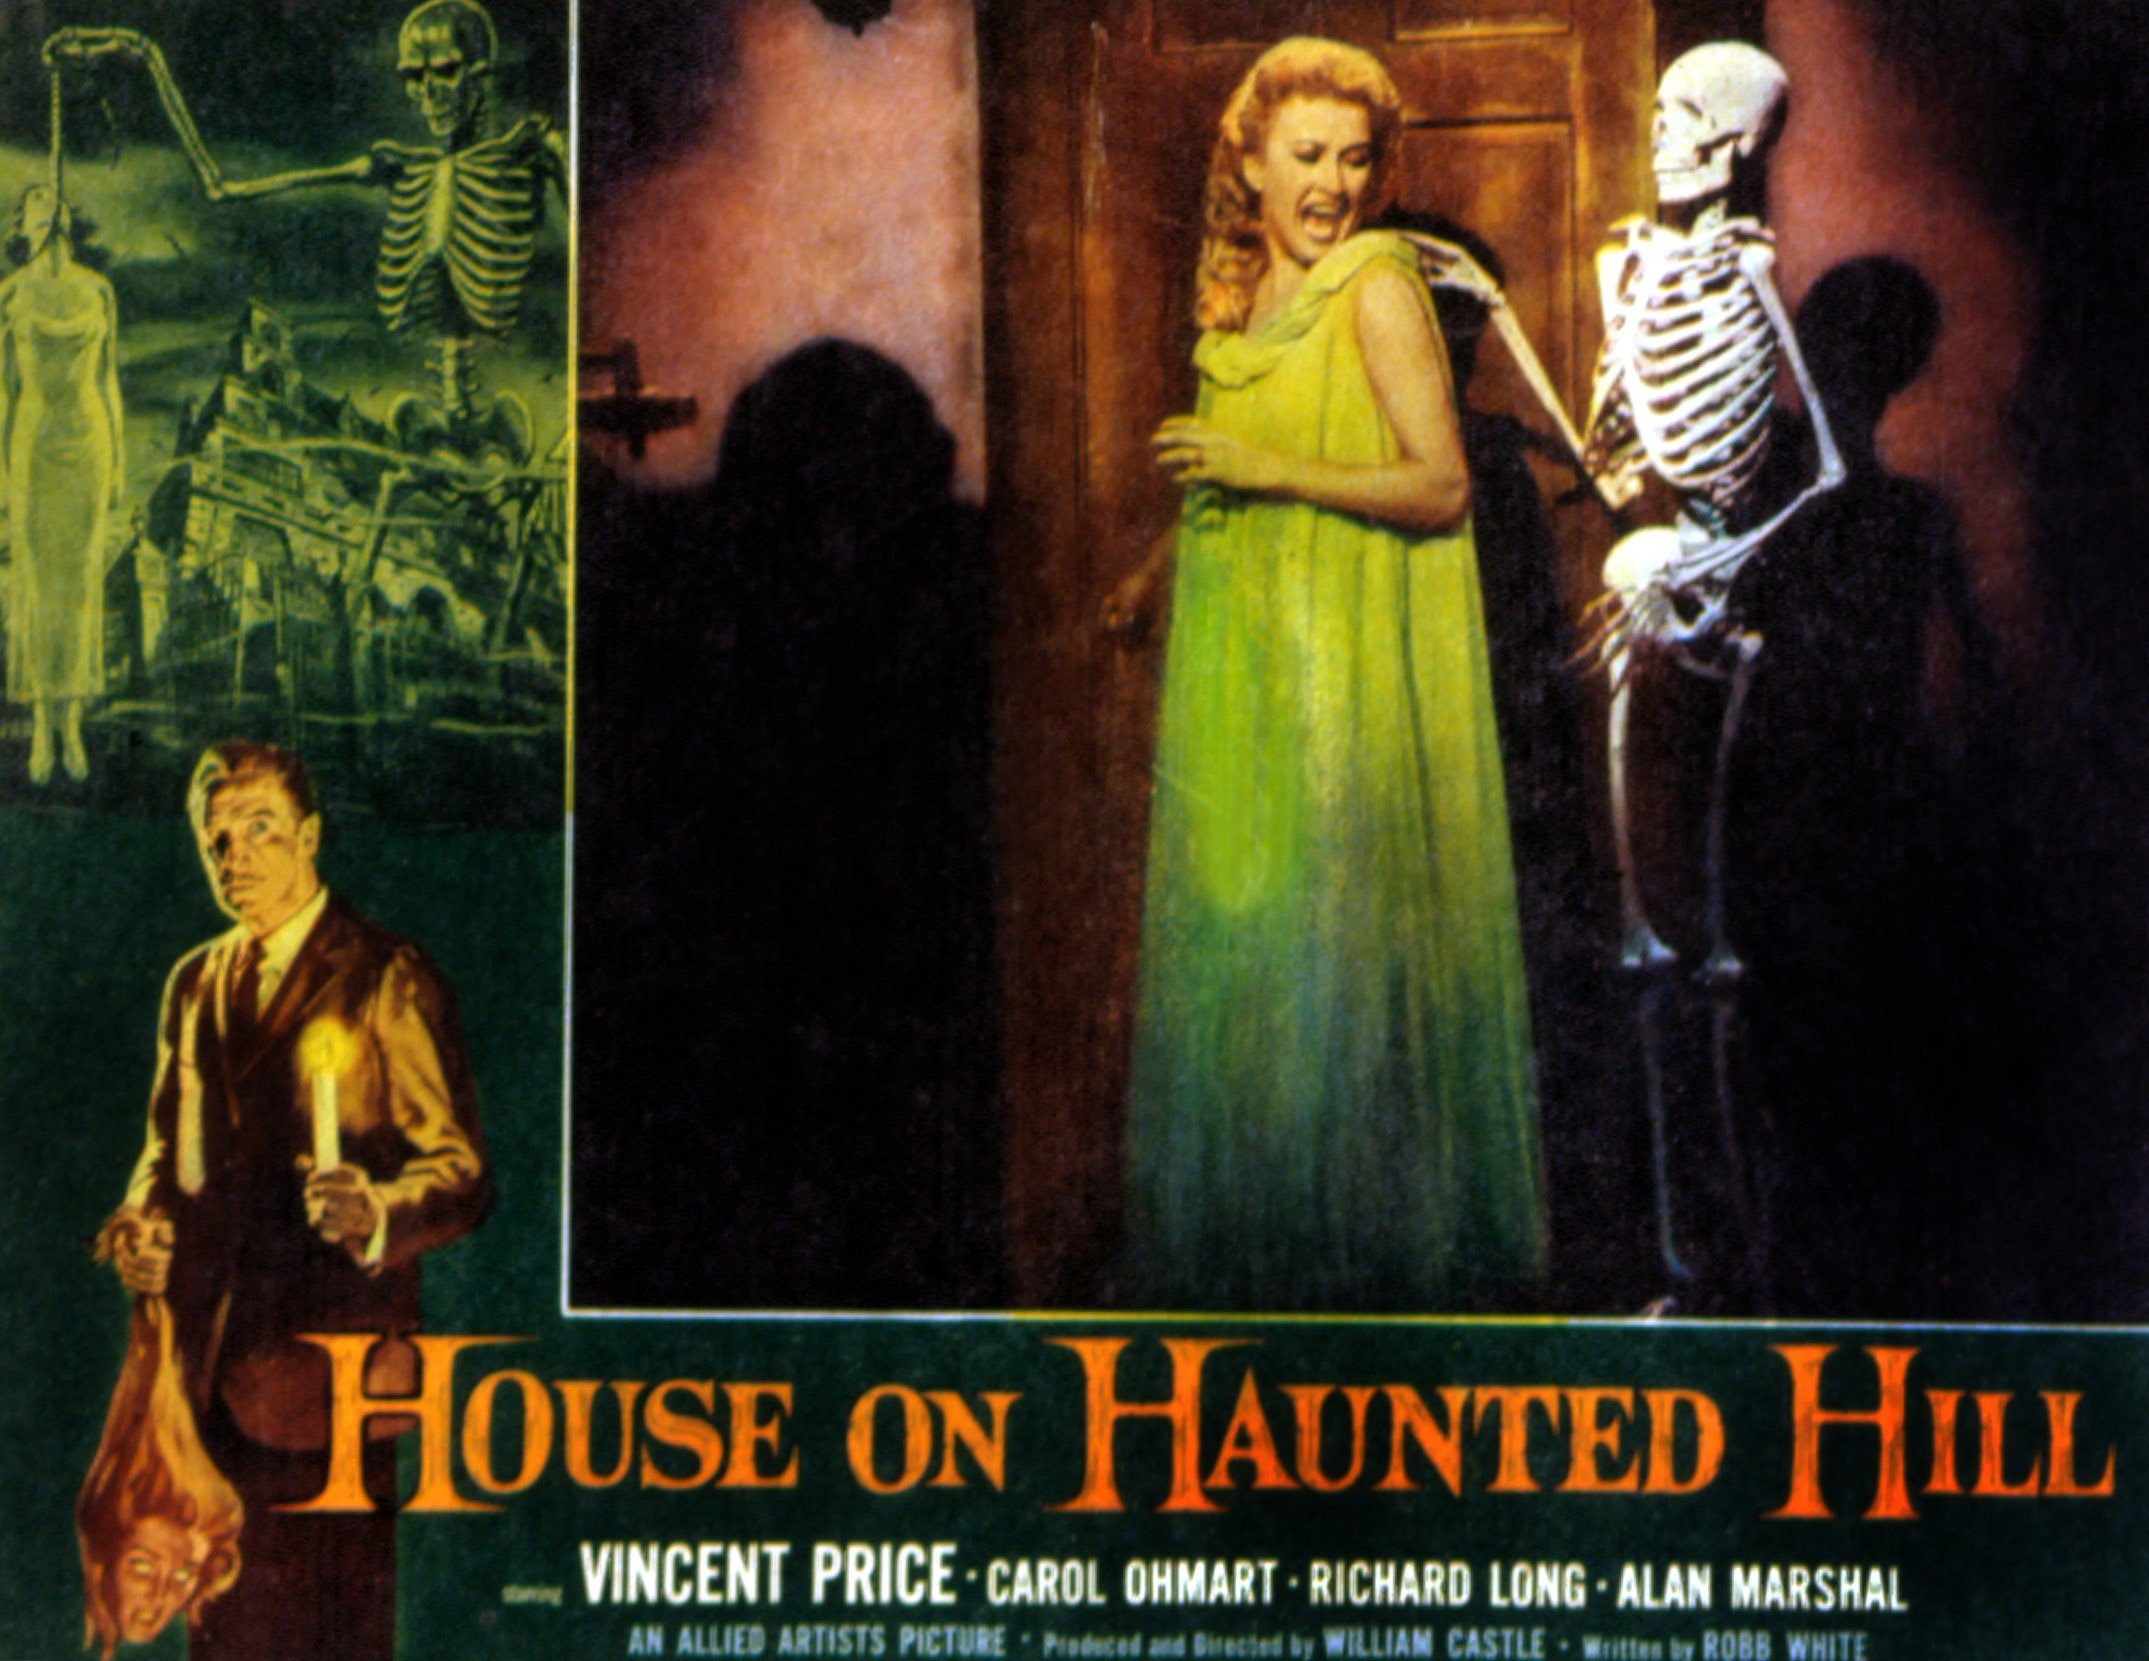 Lobby card for the 1959 Vincent Price movie 'House on Haunted Hill'